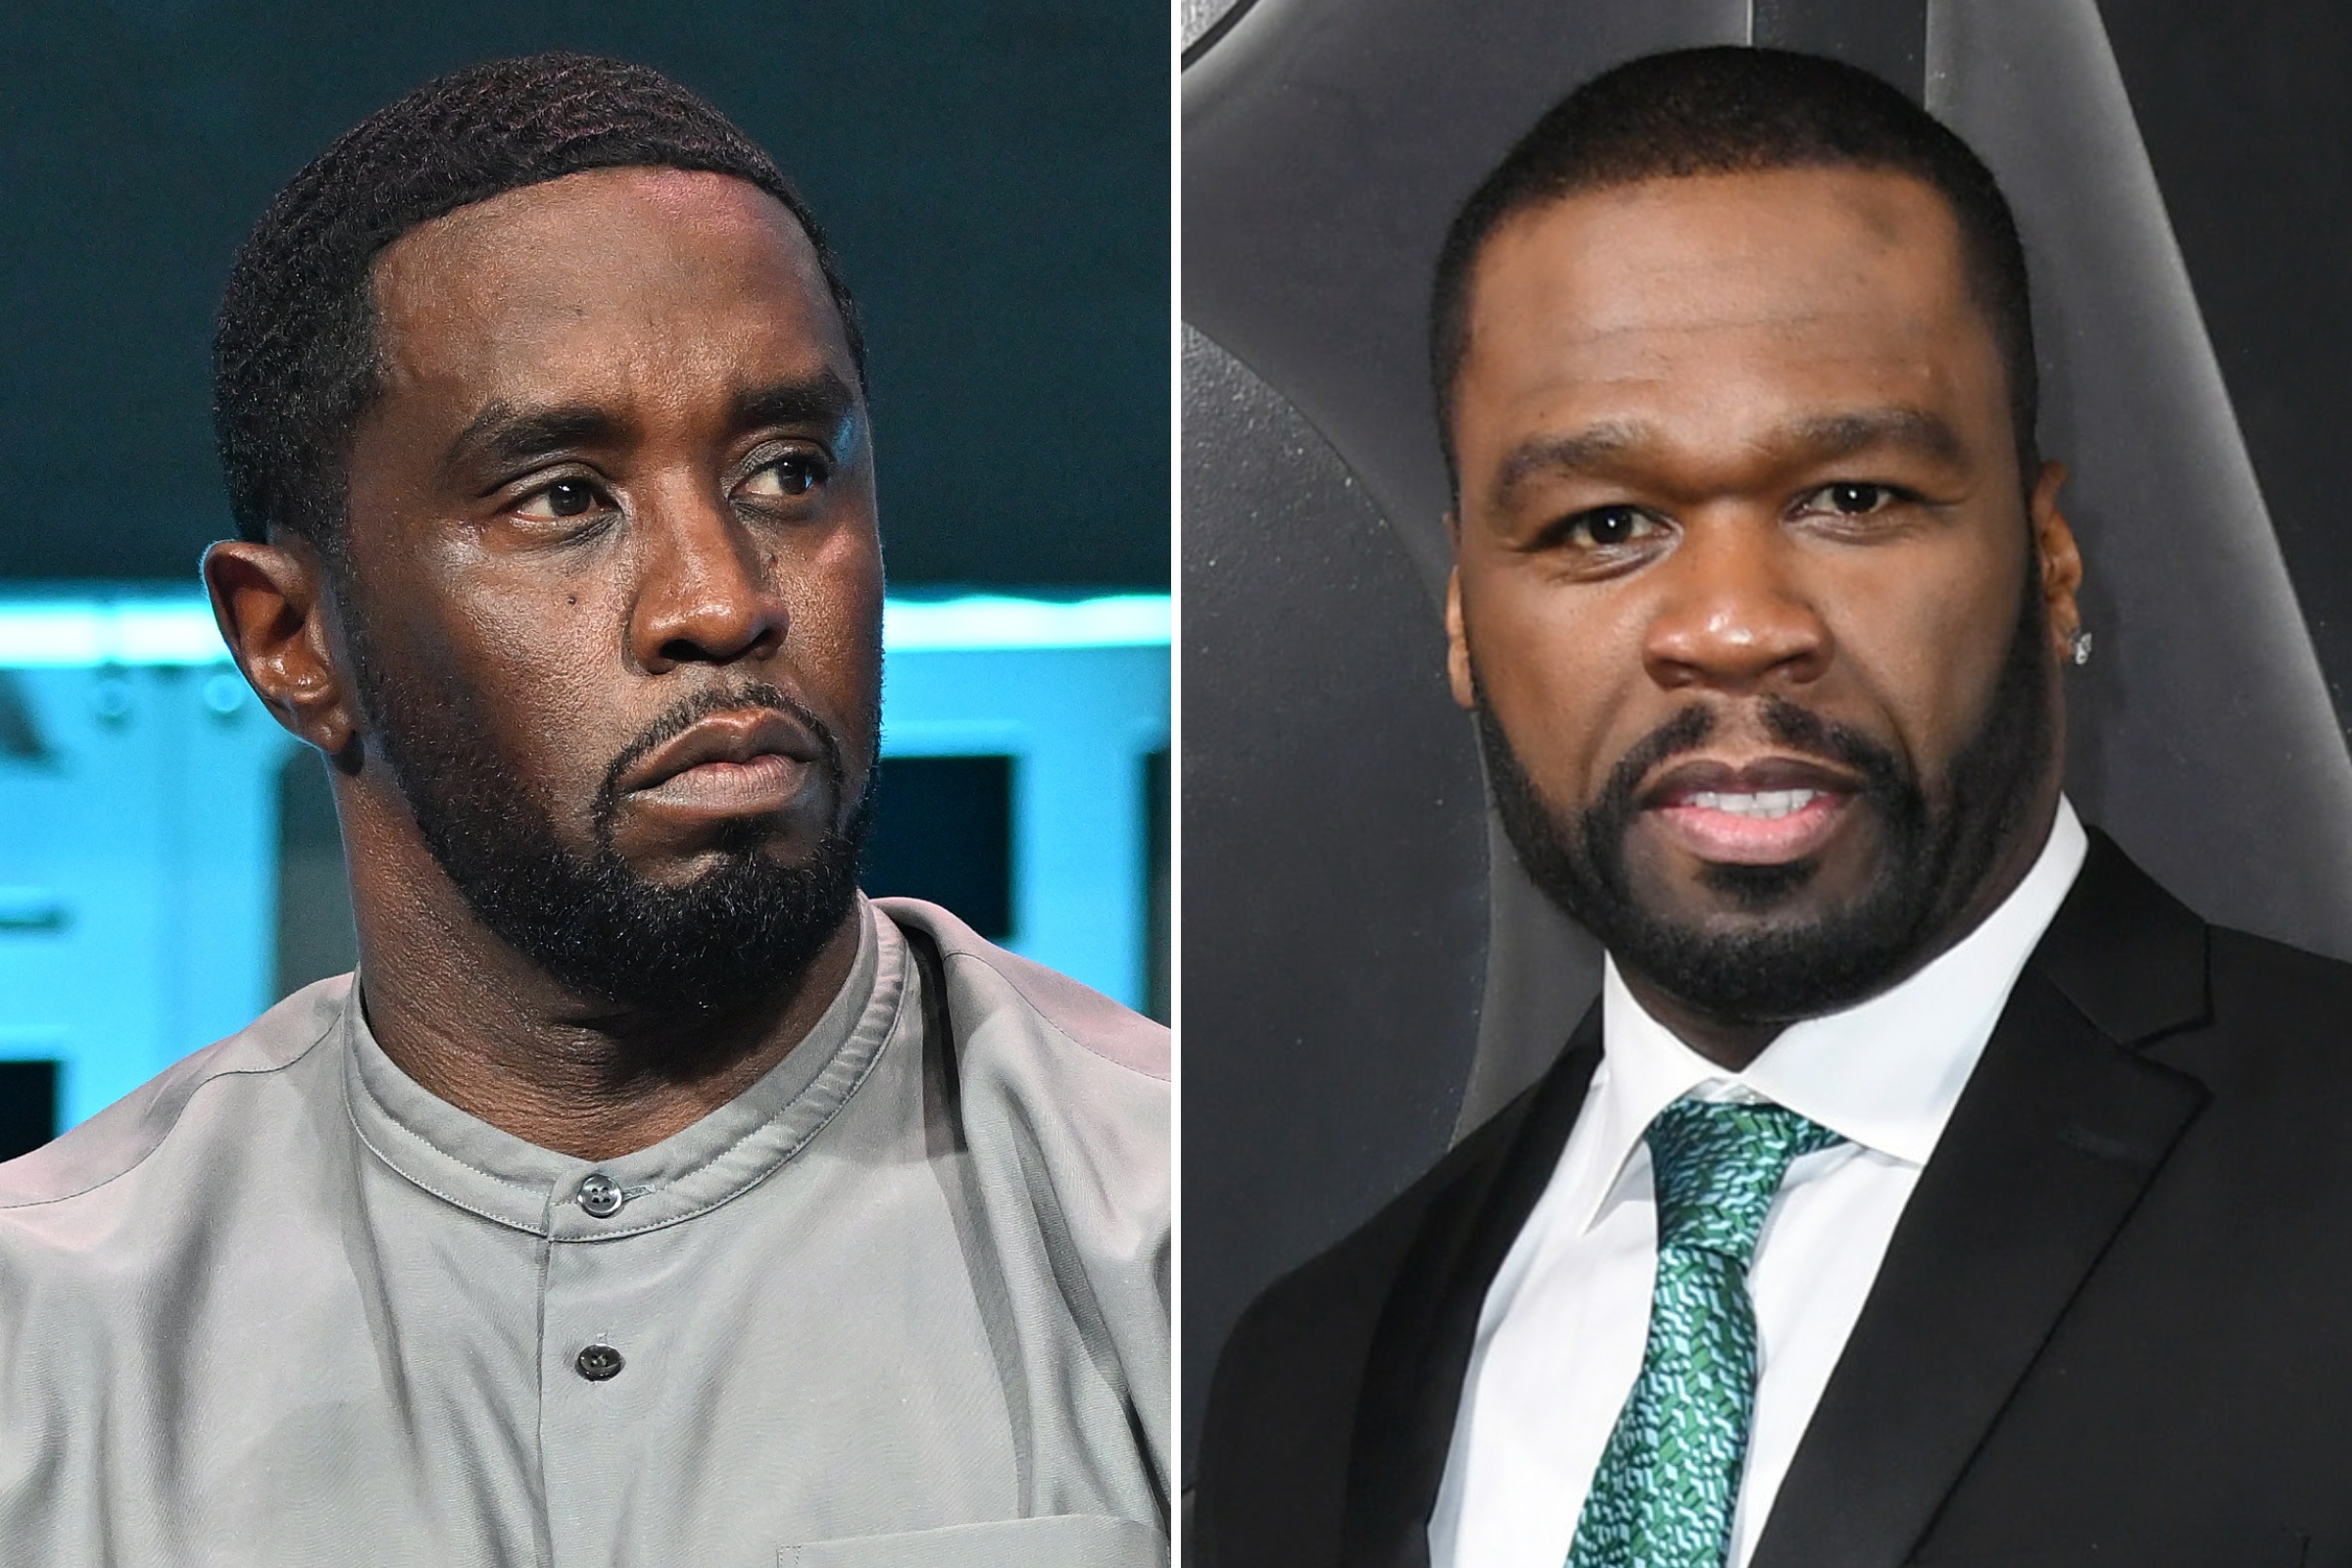 50 Cent Takes Aim at Diddy Amid Assault Allegations - Newsweek